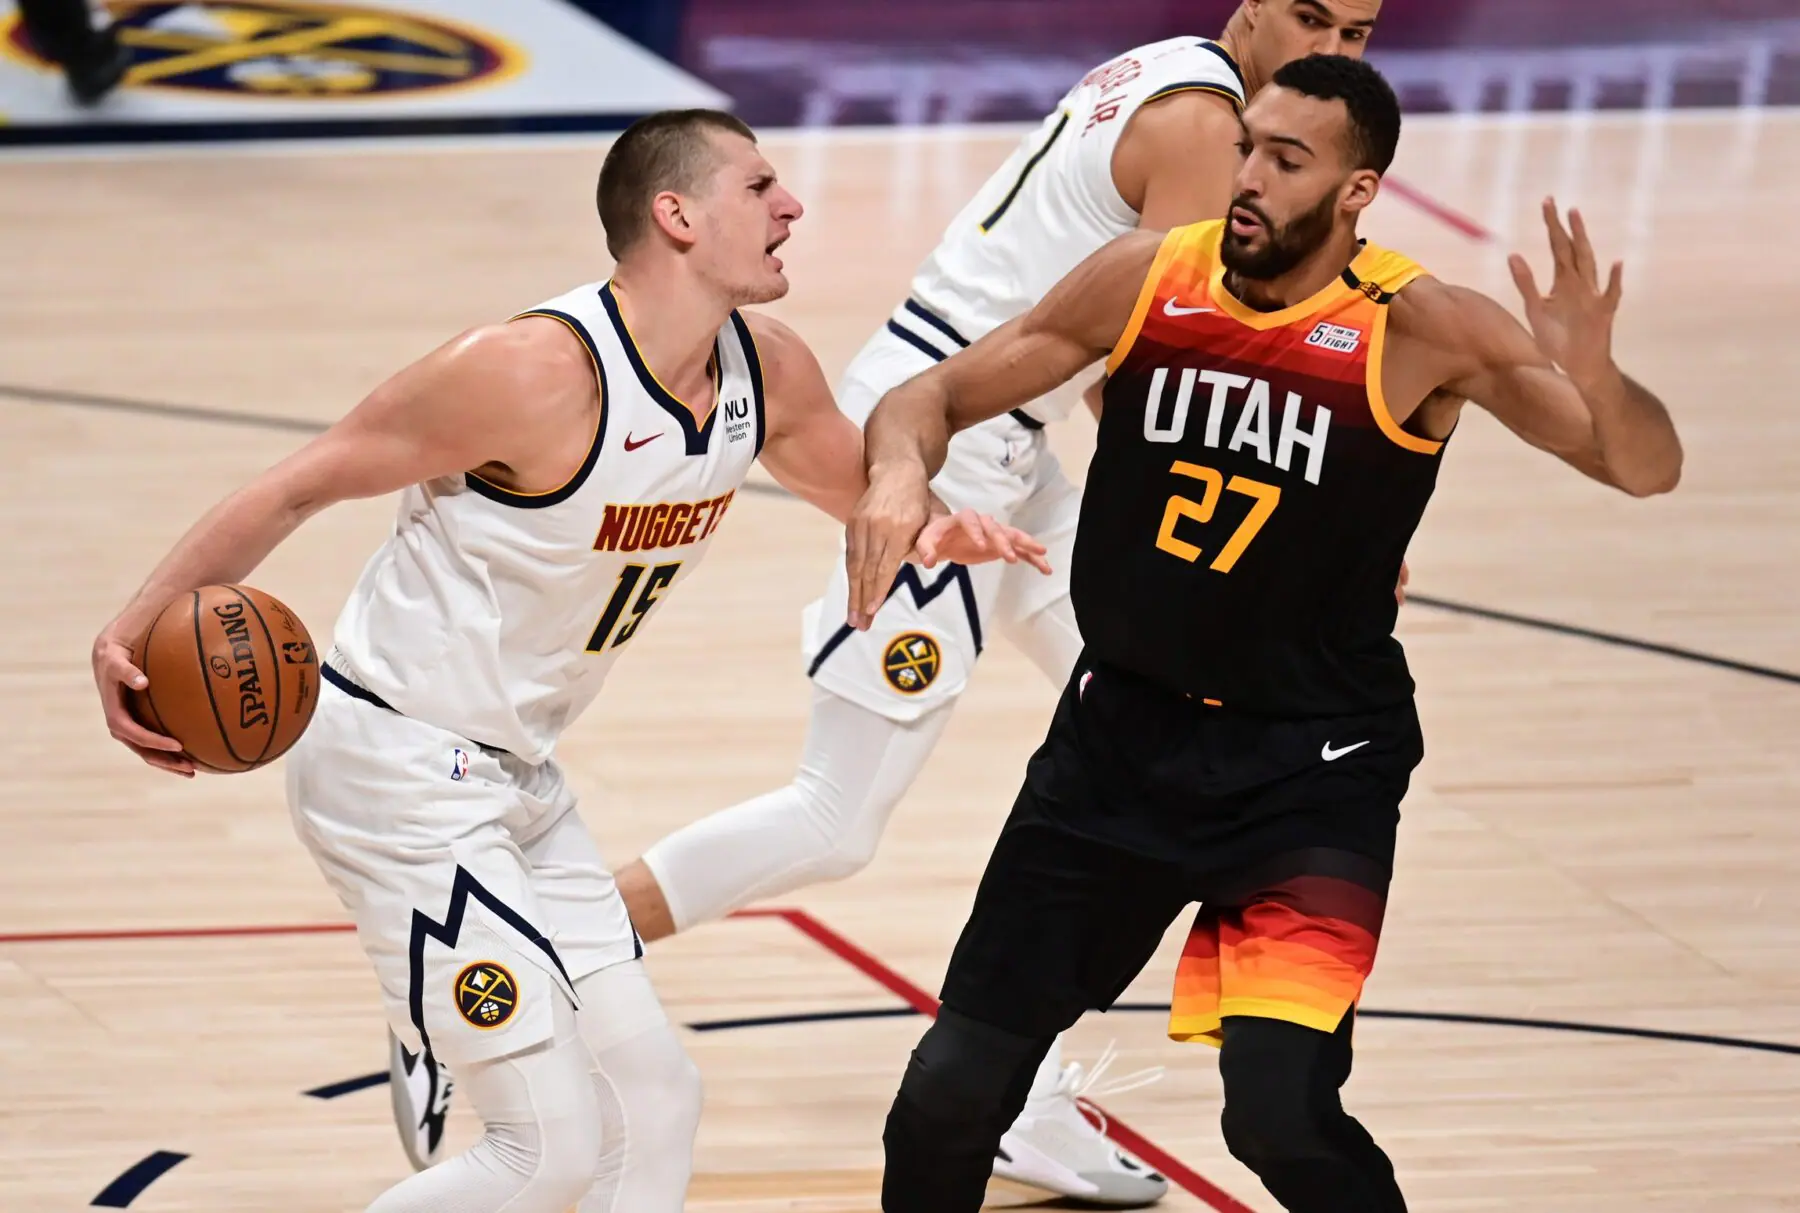 Rudy Gobert Signs Five-Year Extension With Jazz